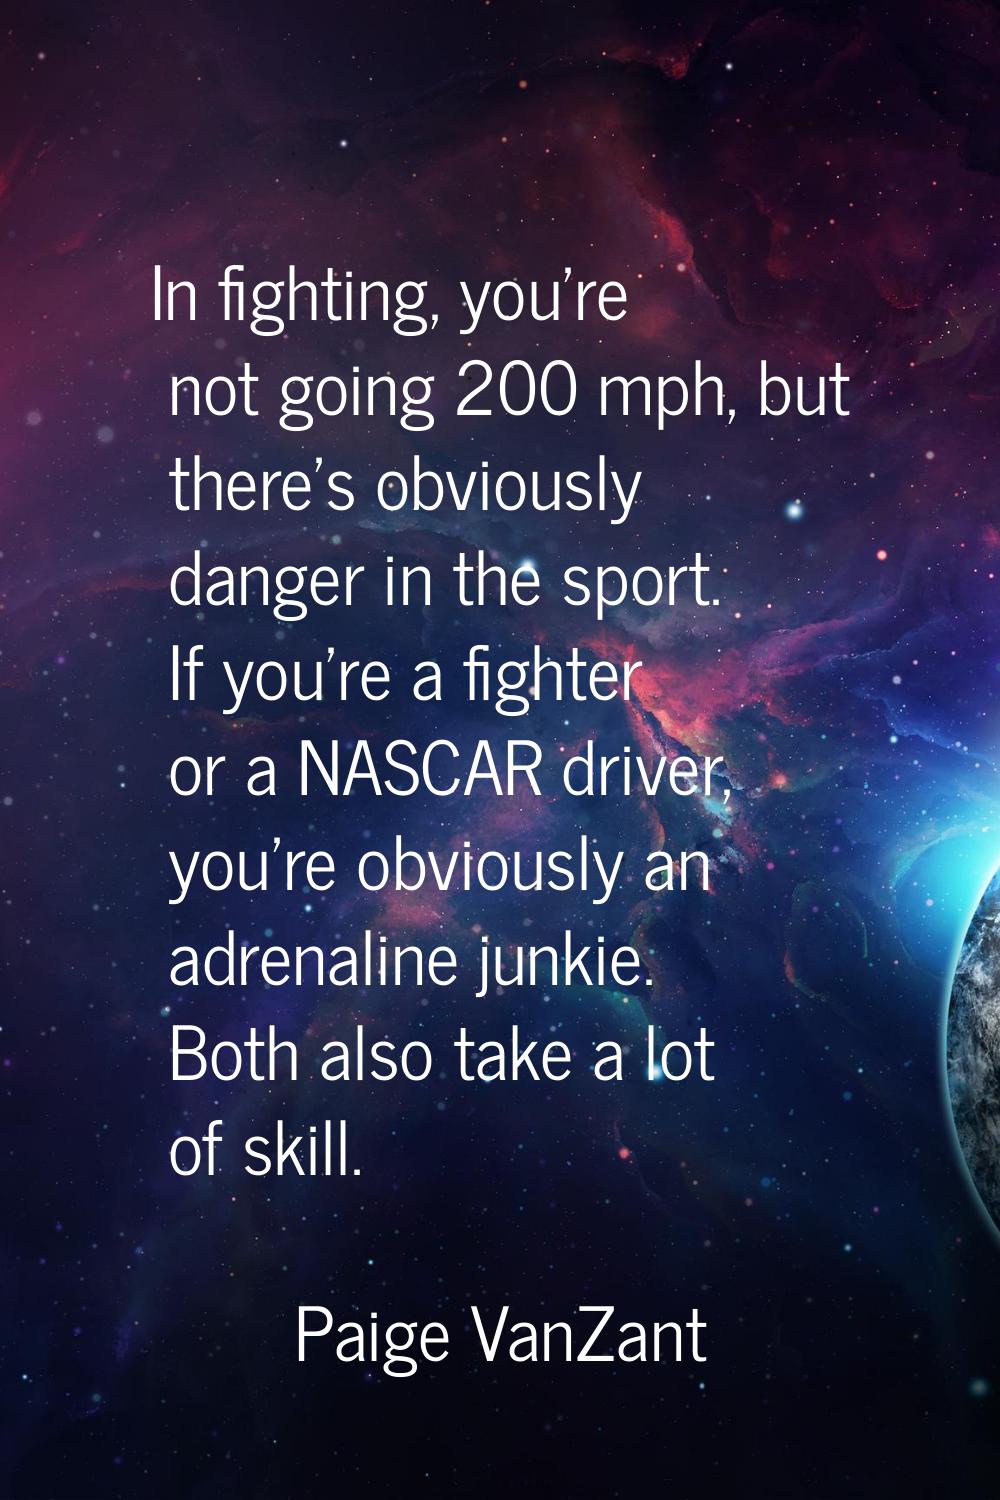 In fighting, you're not going 200 mph, but there's obviously danger in the sport. If you're a fight